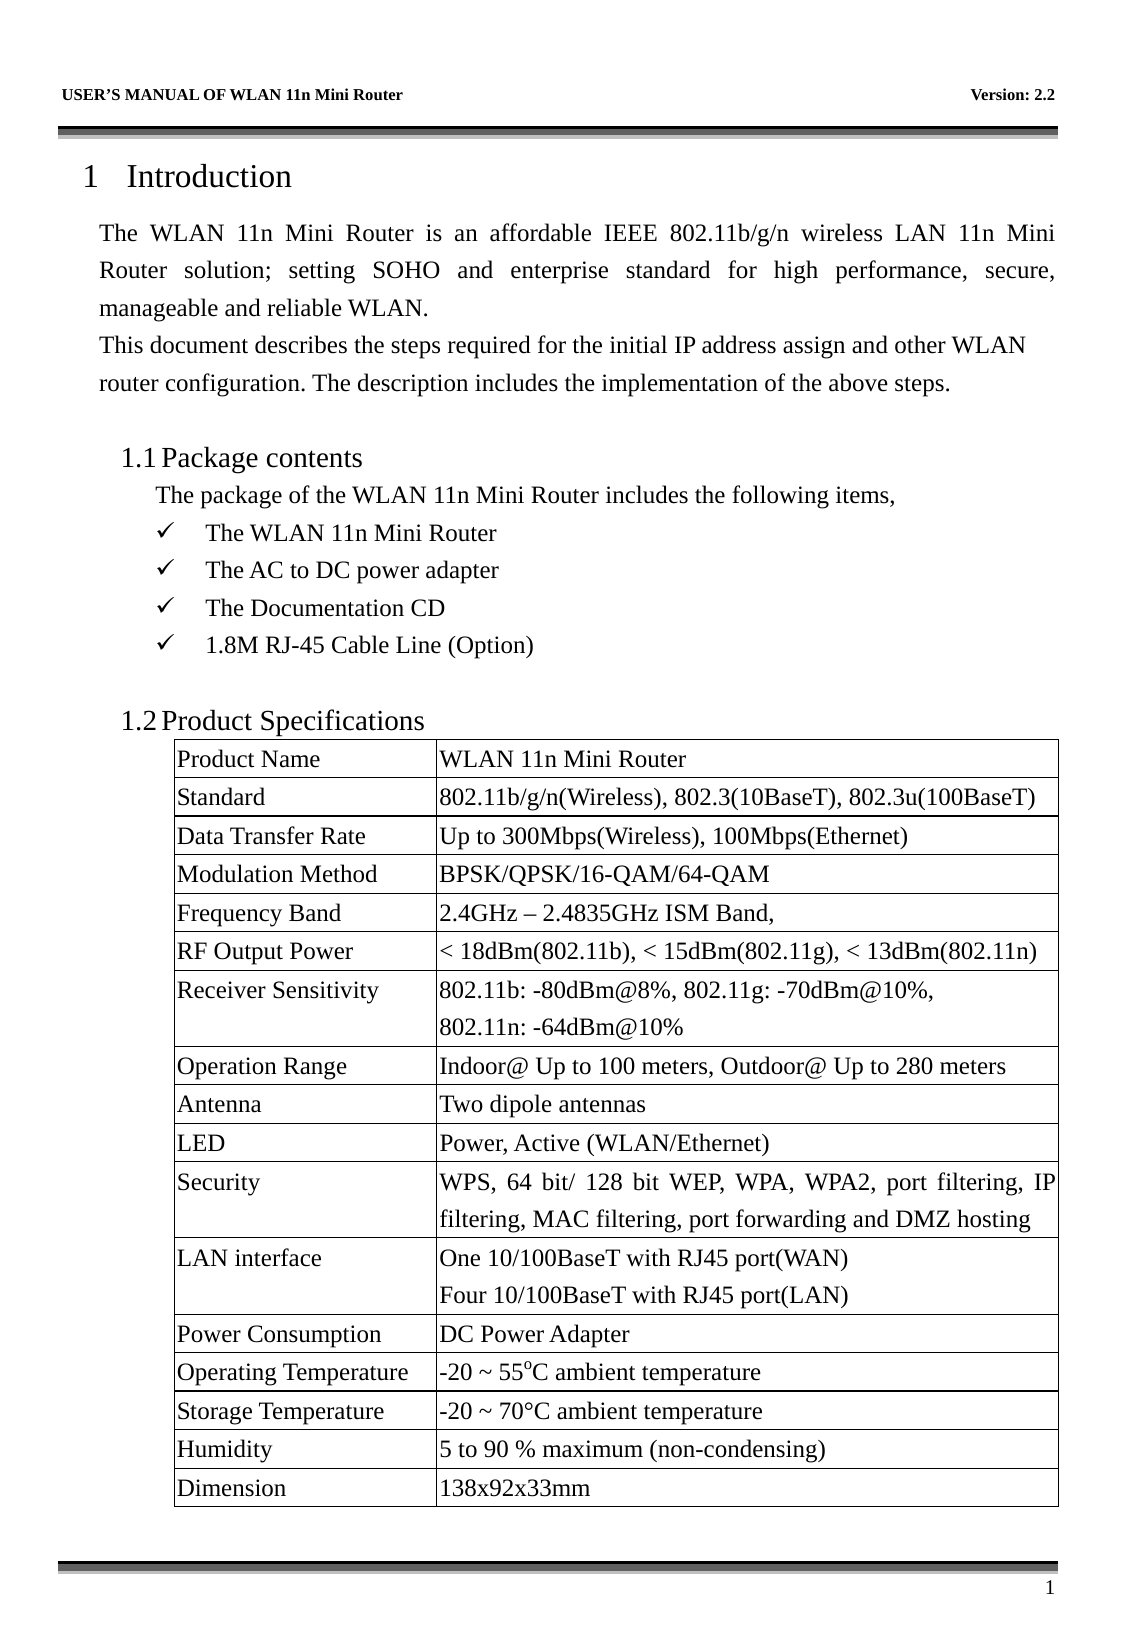   USER’S MANUAL OF WLAN 11n Mini Router    Version: 2.2      1 1 Introduction The WLAN 11n Mini Router is an affordable IEEE 802.11b/g/n wireless LAN 11n Mini Router solution; setting SOHO and enterprise standard for high performance, secure, manageable and reliable WLAN. This document describes the steps required for the initial IP address assign and other WLAN router configuration. The description includes the implementation of the above steps.  1.1 Package contents The package of the WLAN 11n Mini Router includes the following items,   The WLAN 11n Mini Router   The AC to DC power adapter   The Documentation CD   1.8M RJ-45 Cable Line (Option)  1.2 Product Specifications Product Name  WLAN 11n Mini Router Standard  802.11b/g/n(Wireless), 802.3(10BaseT), 802.3u(100BaseT) Data Transfer Rate  Up to 300Mbps(Wireless), 100Mbps(Ethernet) Modulation Method  BPSK/QPSK/16-QAM/64-QAM Frequency Band  2.4GHz – 2.4835GHz ISM Band, RF Output Power  &lt; 18dBm(802.11b), &lt; 15dBm(802.11g), &lt; 13dBm(802.11n) Receiver Sensitivity  802.11b: -80dBm@8%, 802.11g: -70dBm@10%, 802.11n: -64dBm@10% Operation Range  Indoor@ Up to 100 meters, Outdoor@ Up to 280 meters Antenna  Two dipole antennas   LED Power, Active (WLAN/Ethernet) Security  WPS, 64 bit/ 128 bit WEP, WPA, WPA2, port filtering, IP filtering, MAC filtering, port forwarding and DMZ hosting LAN interface  One 10/100BaseT with RJ45 port(WAN) Four 10/100BaseT with RJ45 port(LAN) Power Consumption  DC Power Adapter Operating Temperature  -20 ~ 55oC ambient temperature Storage Temperature  -20 ~ 70°C ambient temperature Humidity  5 to 90 % maximum (non-condensing) Dimension 138x92x33mm 